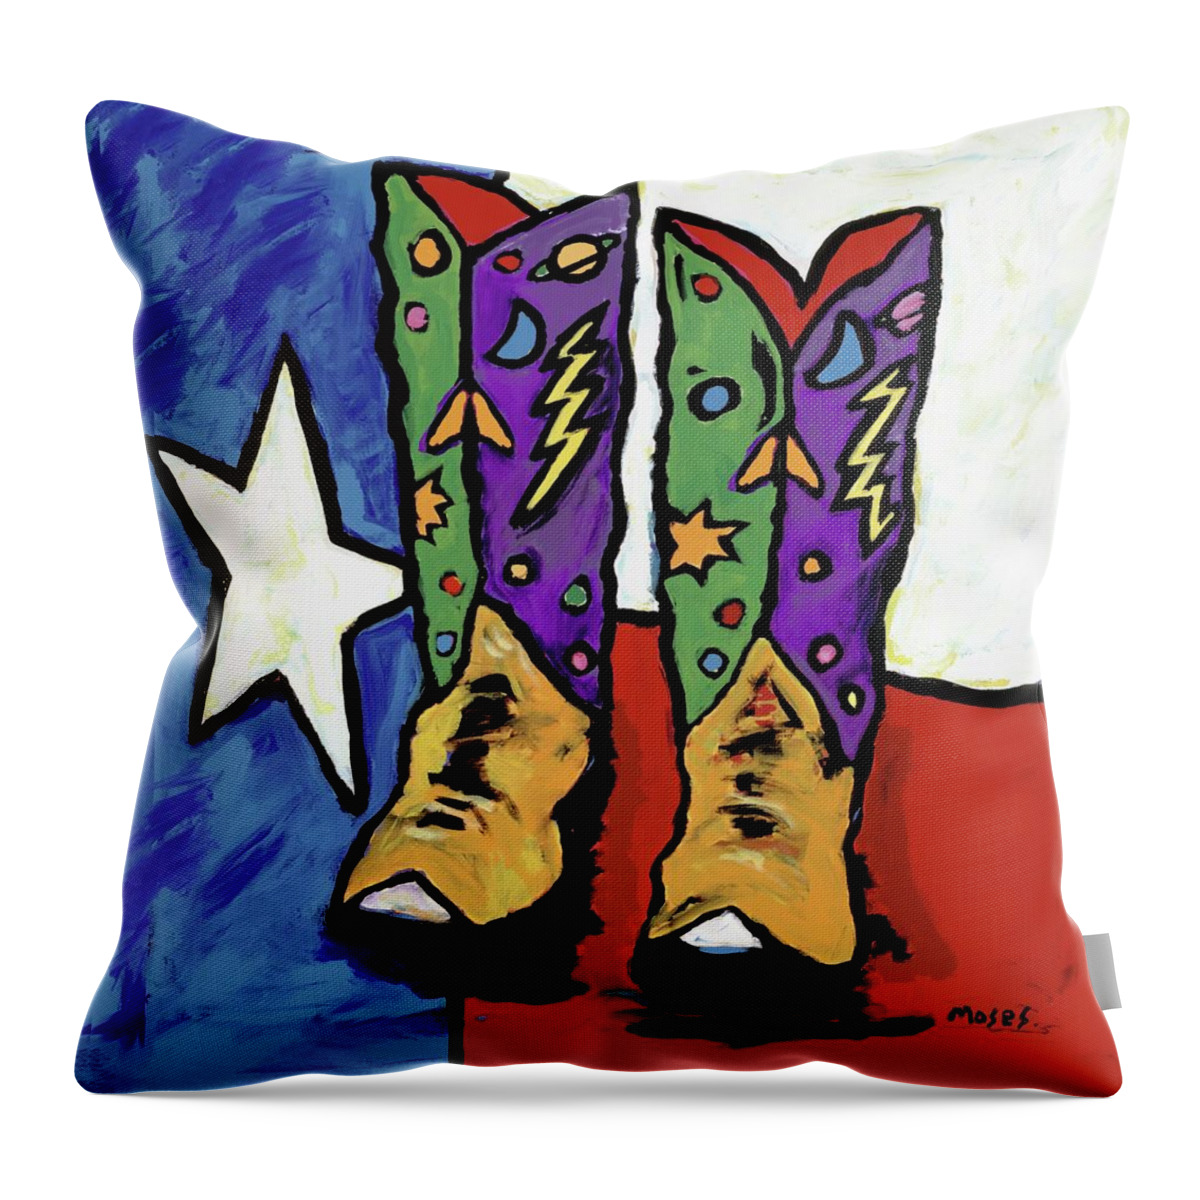 Texas Art Throw Pillow featuring the painting Boots On A Texas Flag by Dale Moses